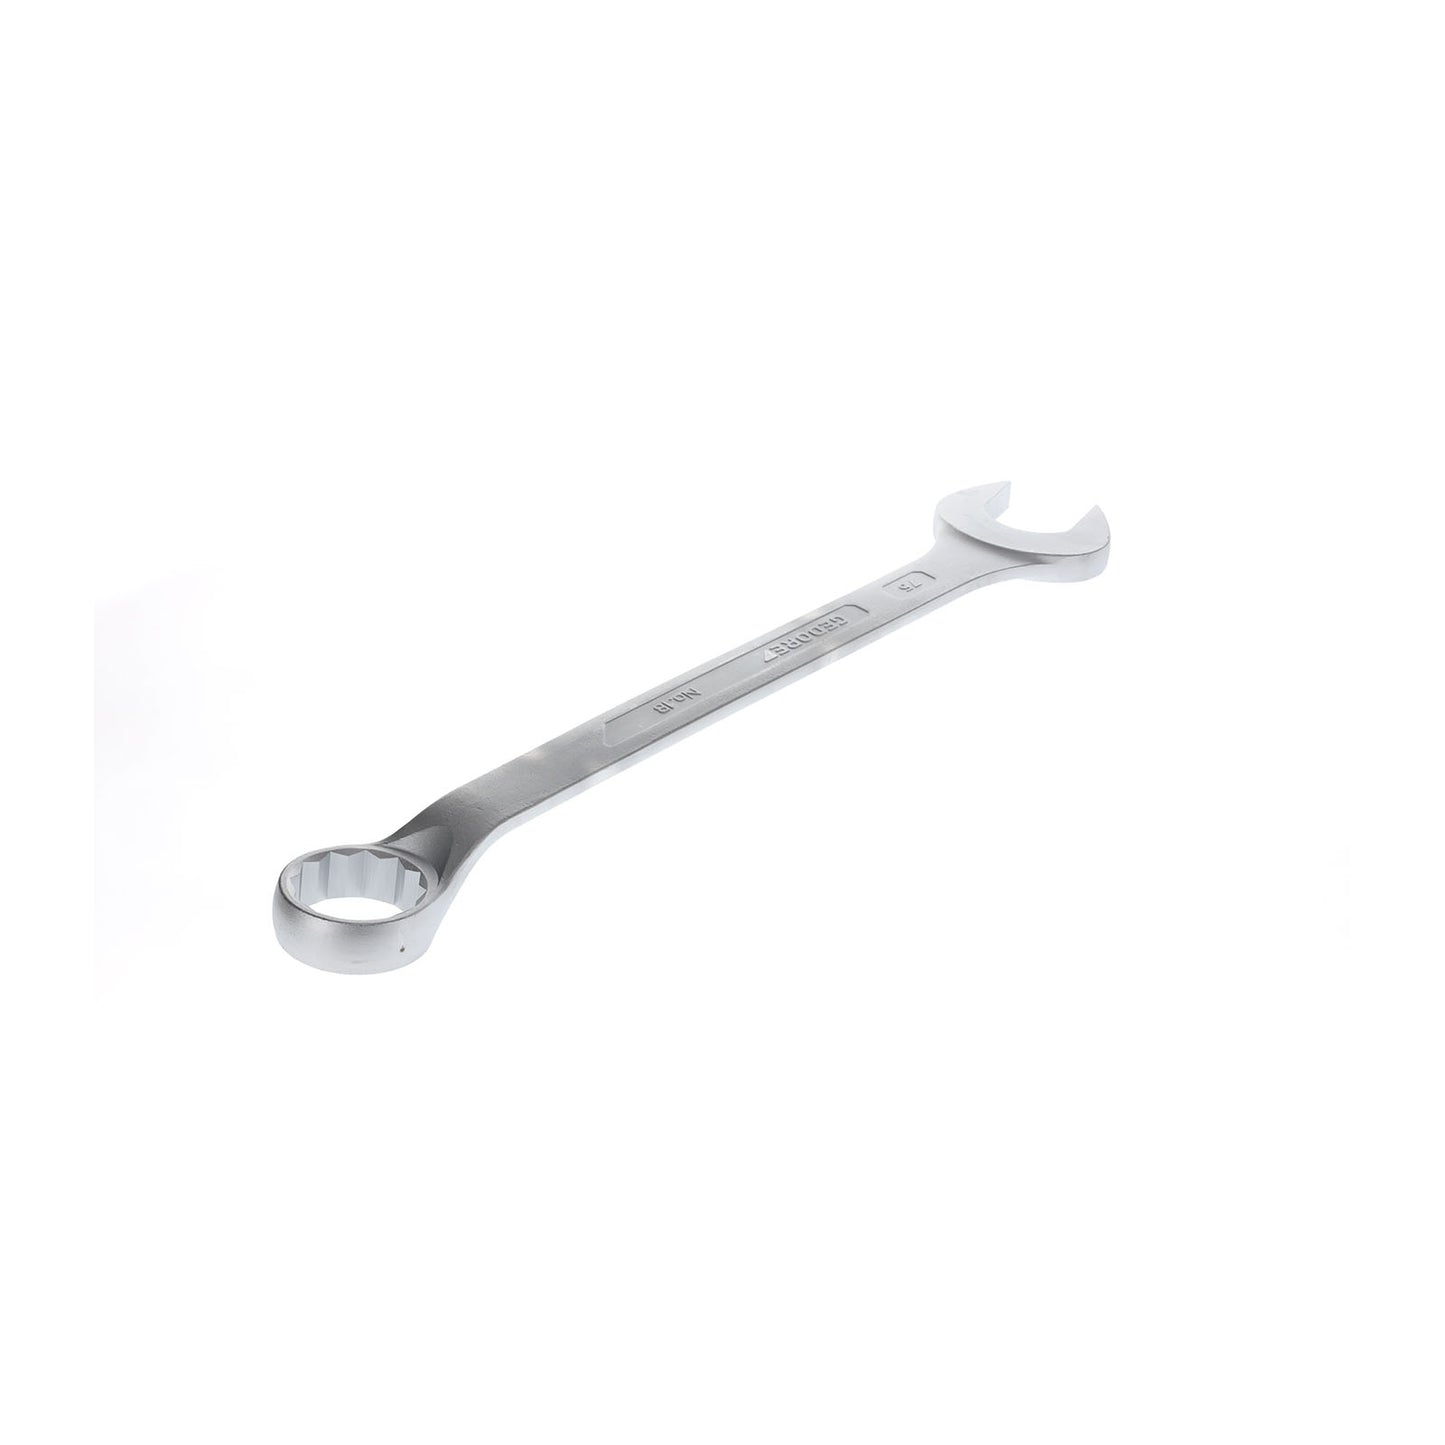 GEDORE 1 B 75 - Offset Combination Wrench, 75mm (6004820)